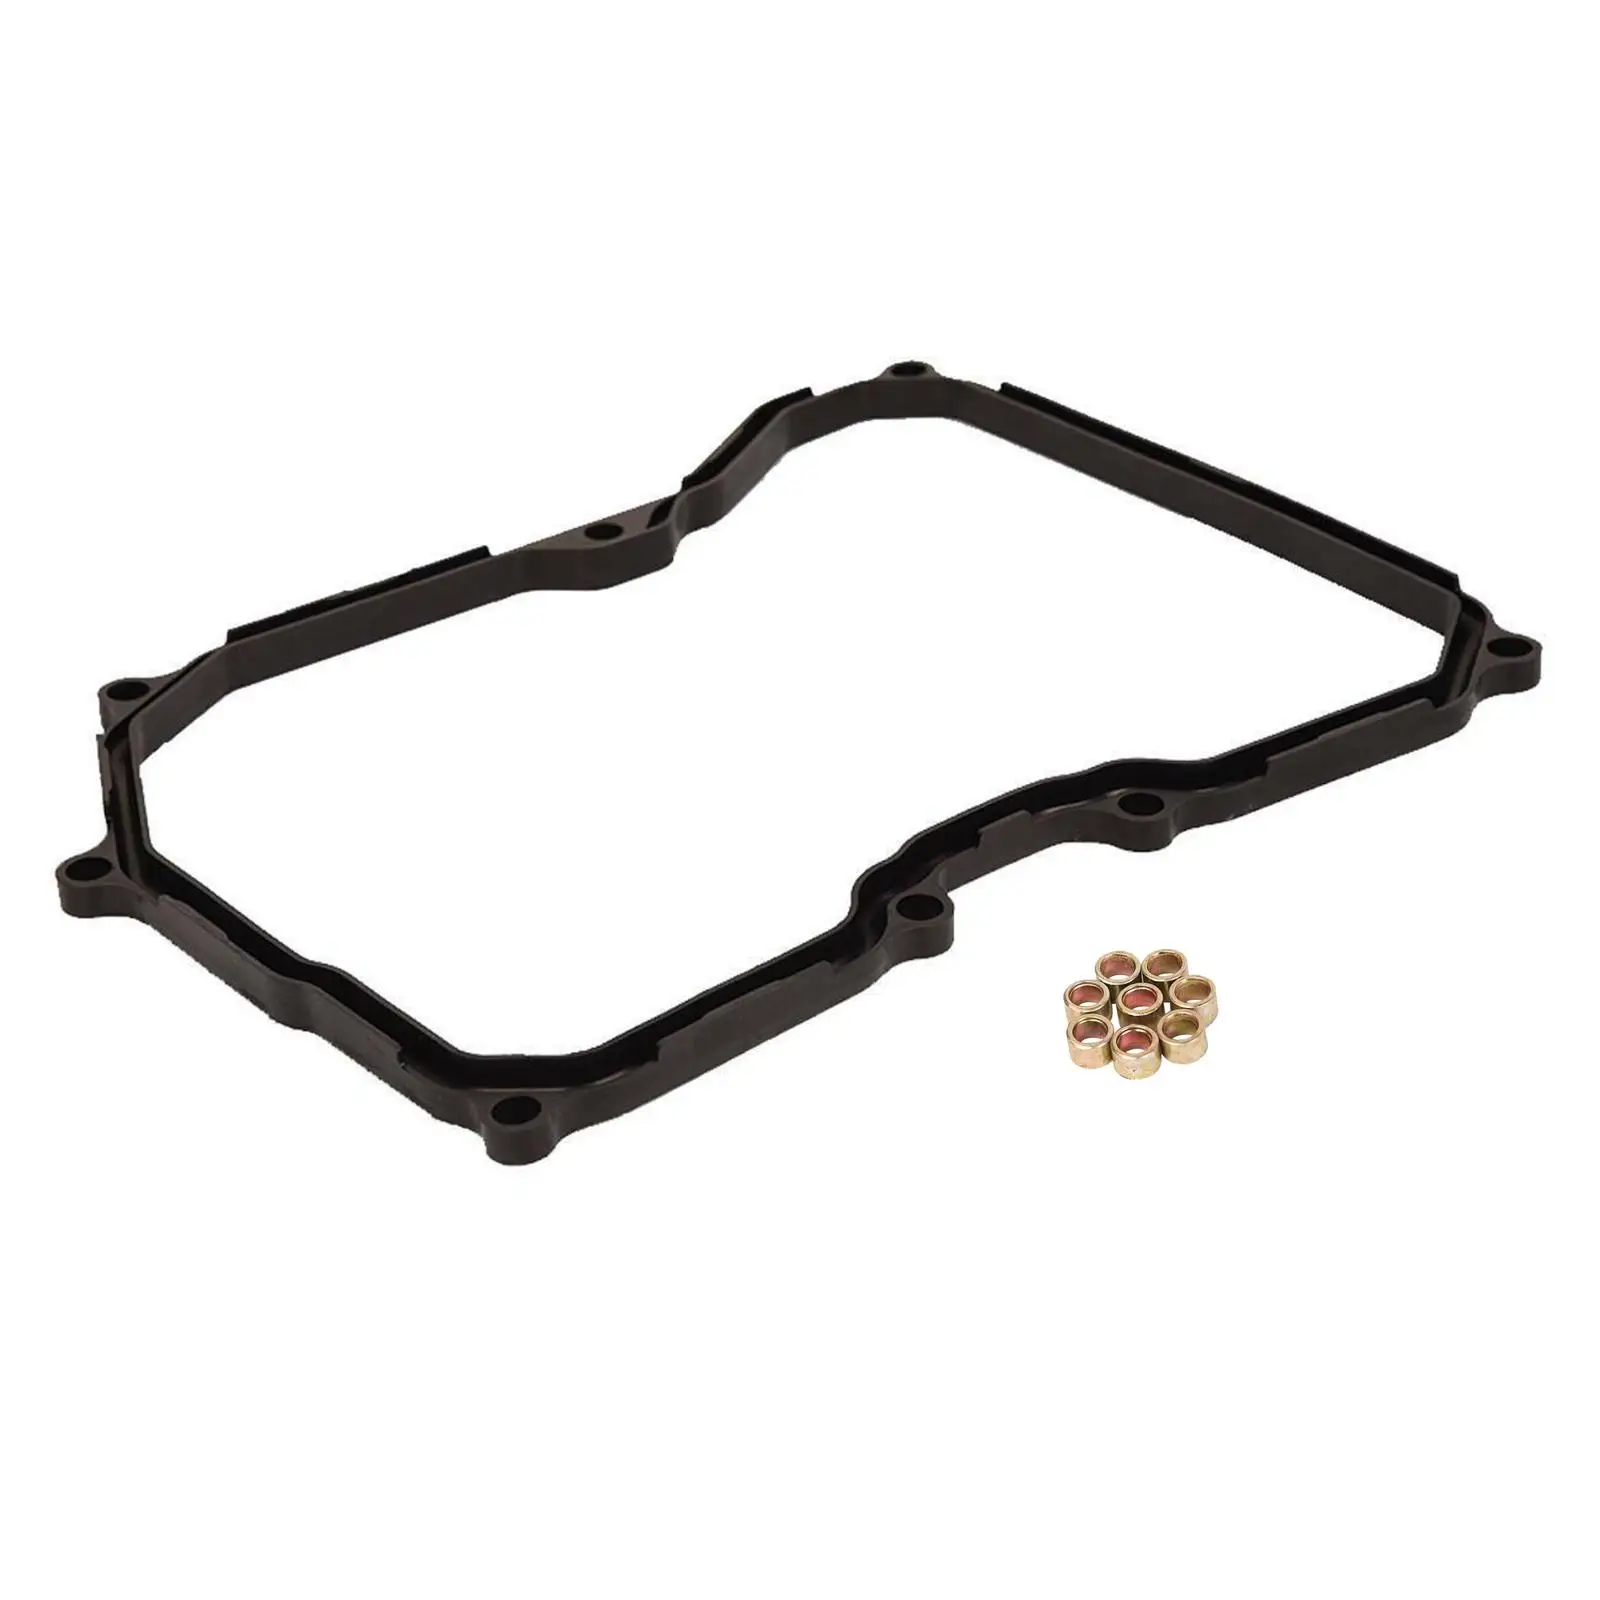 Transmission Pan Gasket 24117566356 Fit for Mini 2007+ Spare Parts Replace